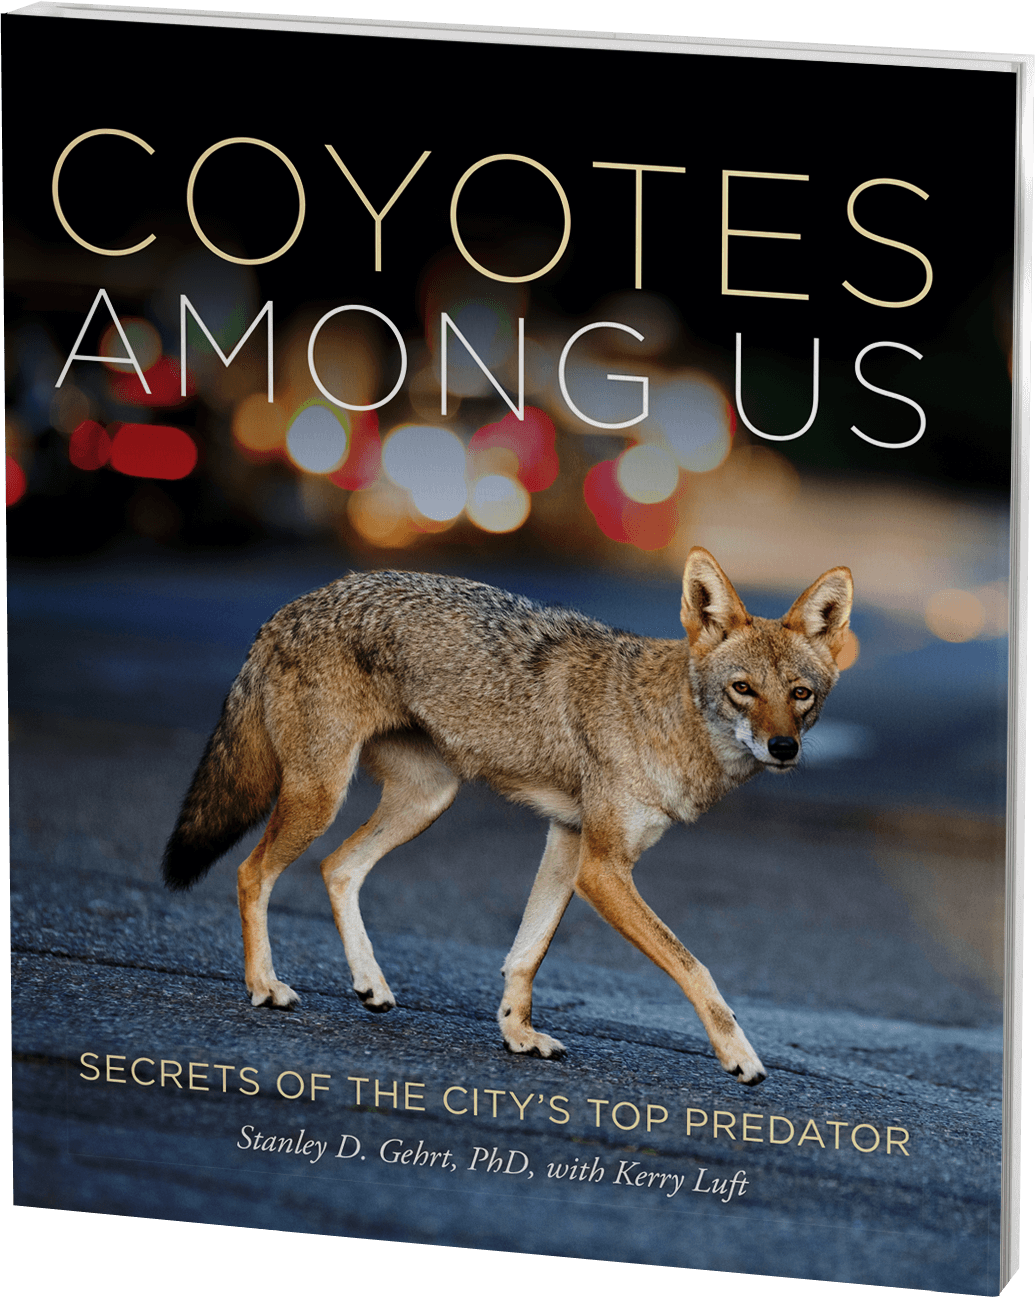 Photo of the Coyotes Among Us Book Cover